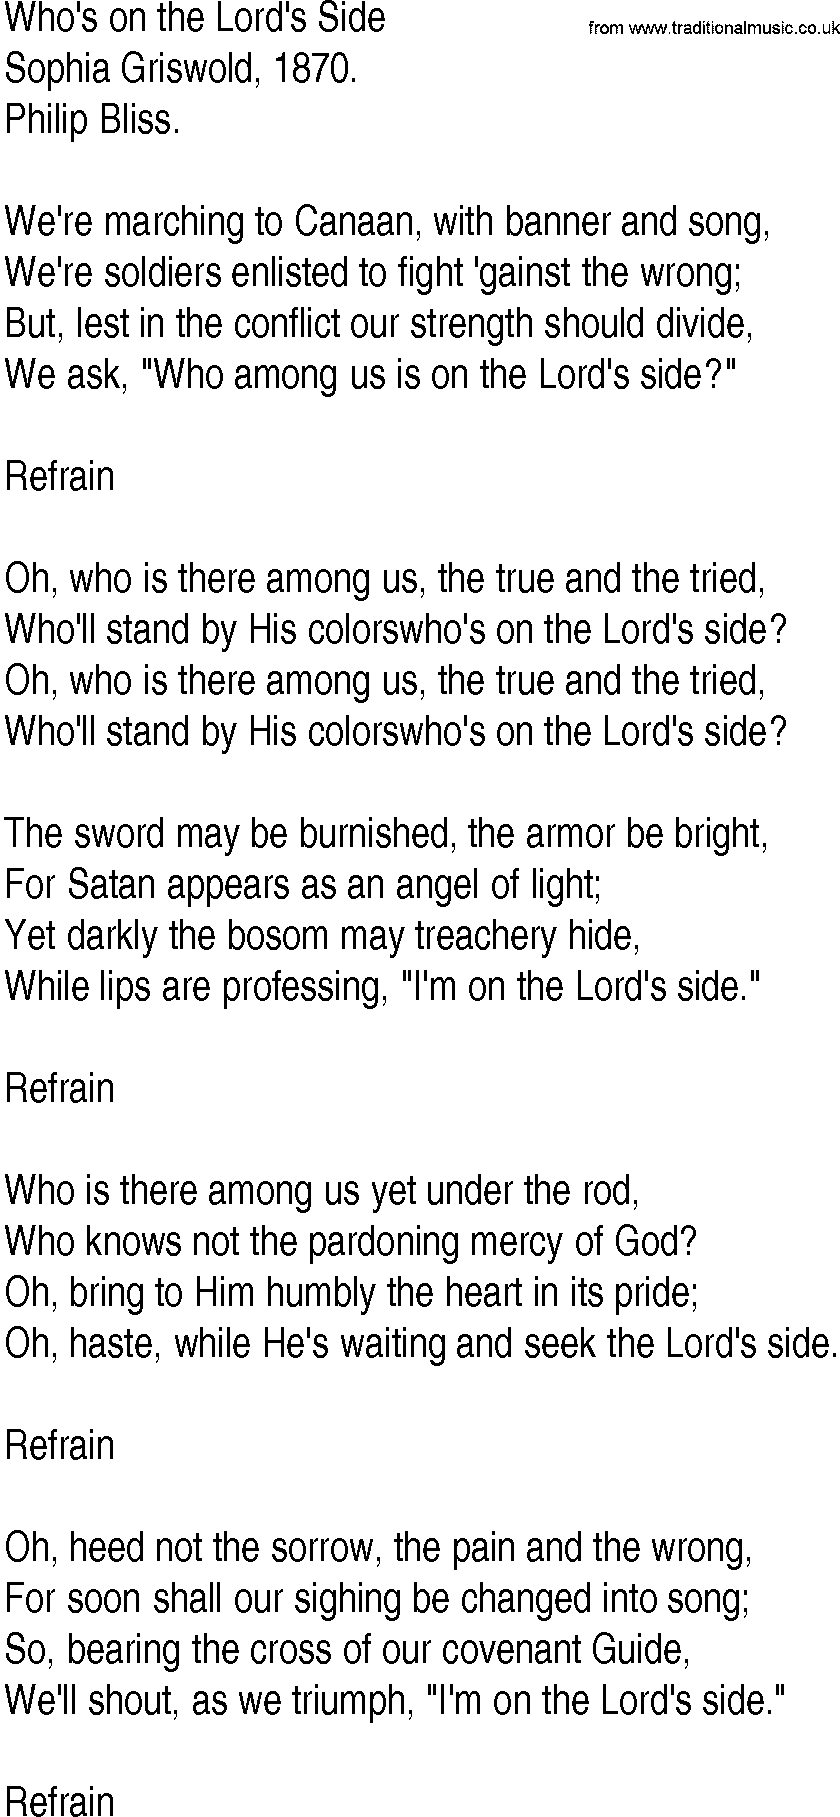 Hymn and Gospel Song: Who's on the Lord's Side by Sophia Griswold lyrics